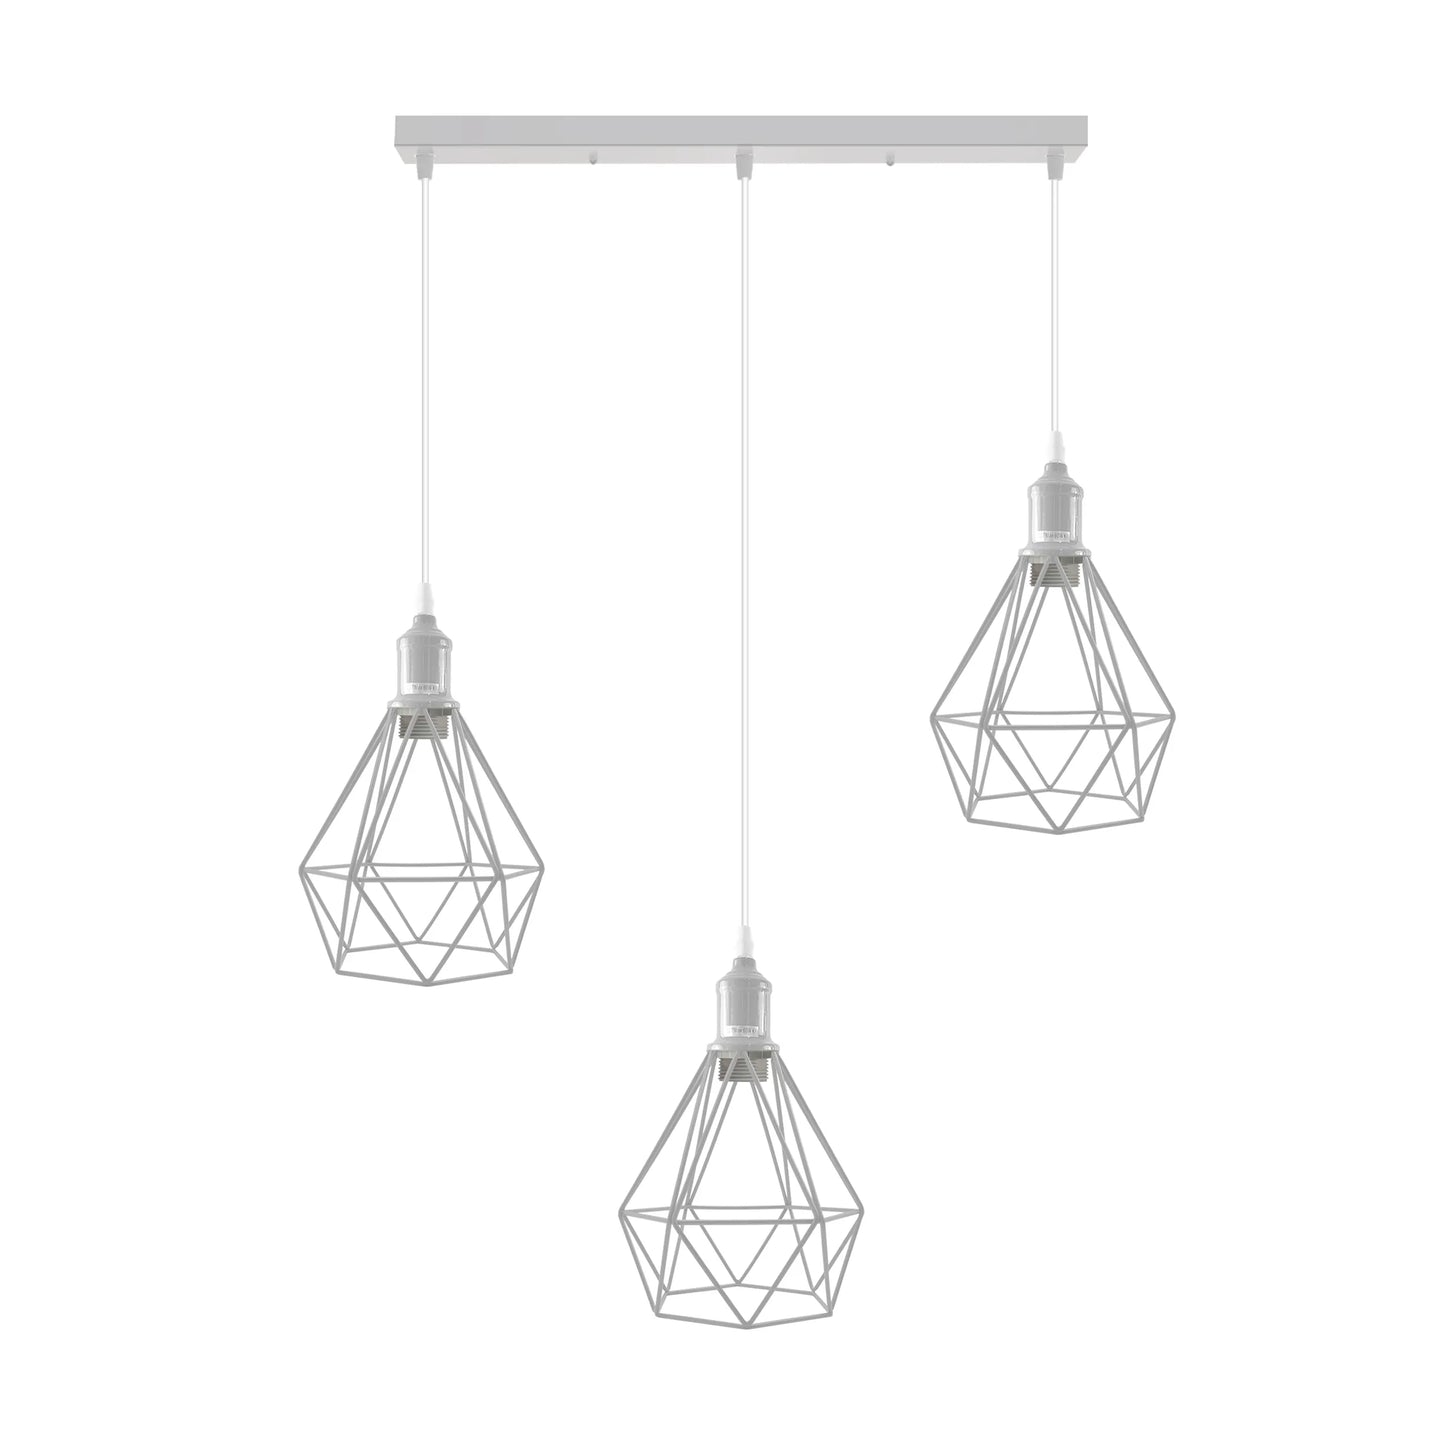 White Cage Shade Rectangle Ceiling Rose Pendant Light Fixture